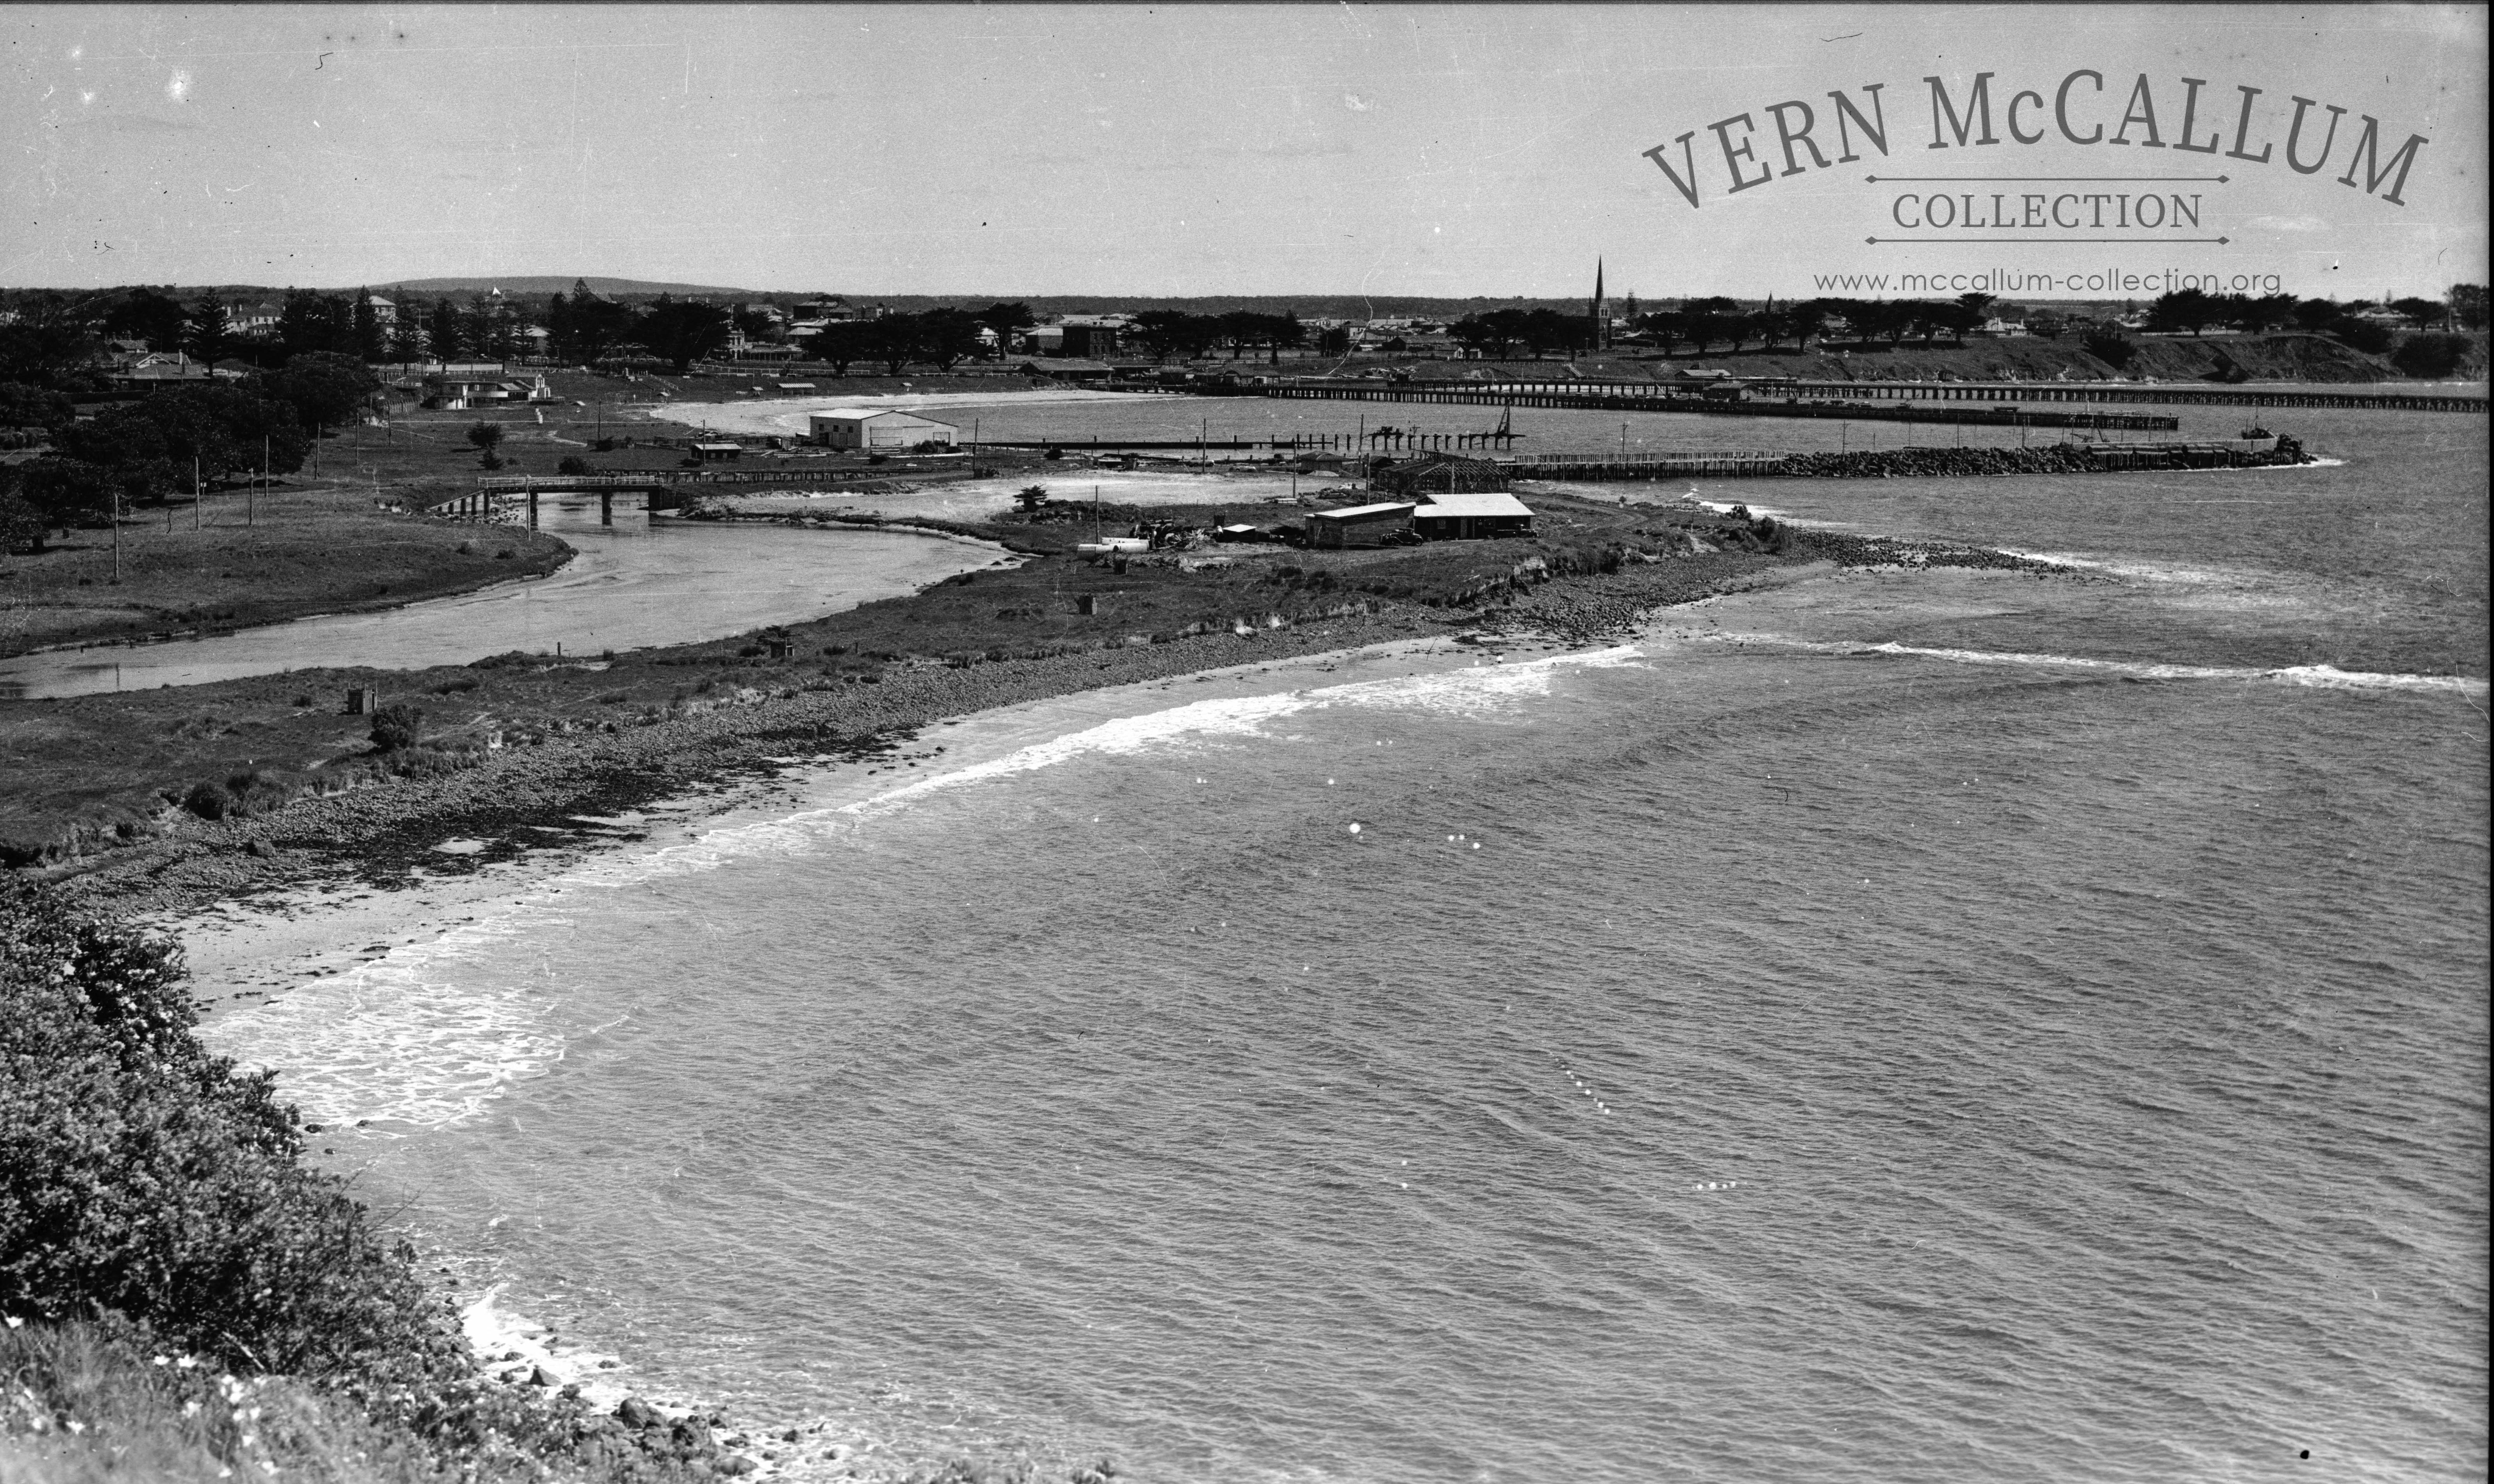 A view of the harbour prior to the commencement of the harbour,showing Barton's beach.